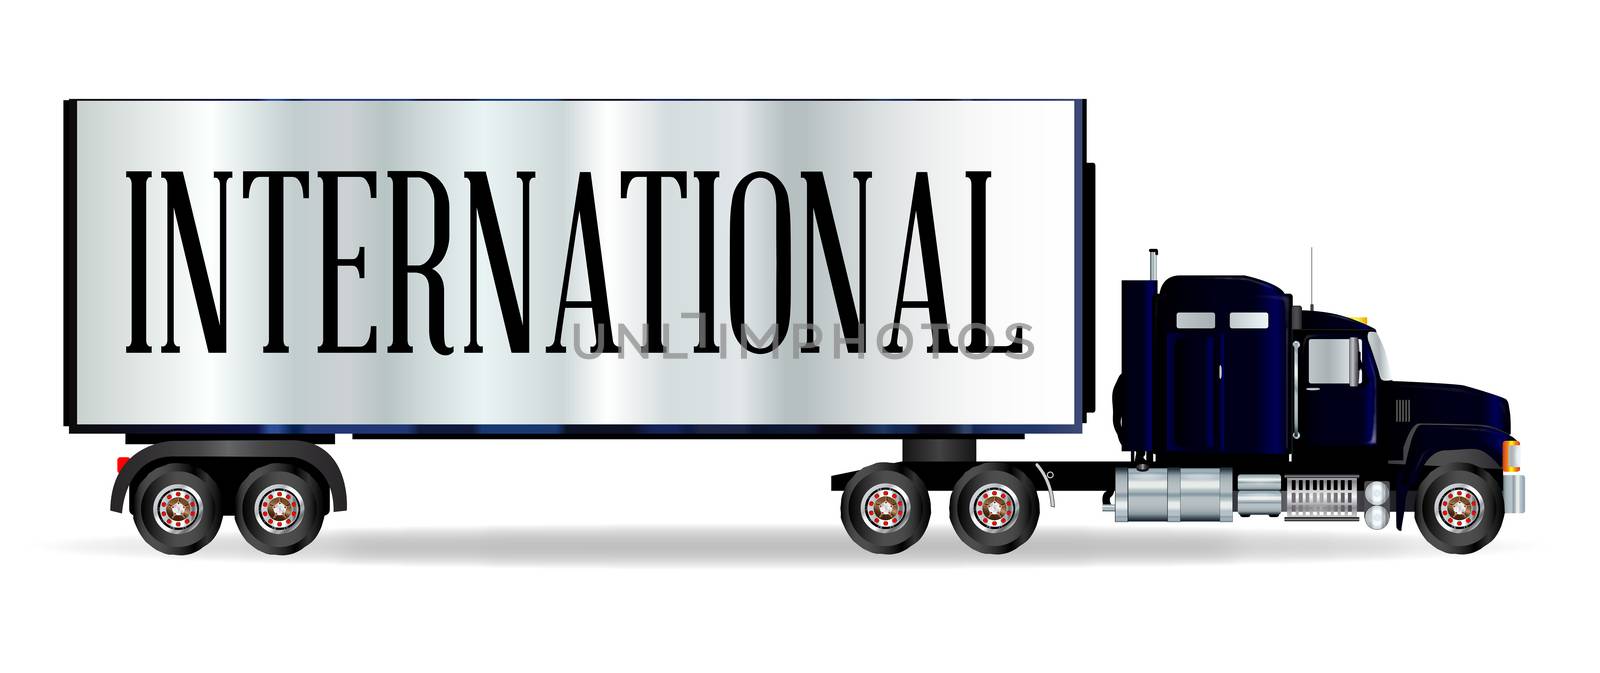 Truck Tractor Unit And Trailer With International Inscription by Bigalbaloo